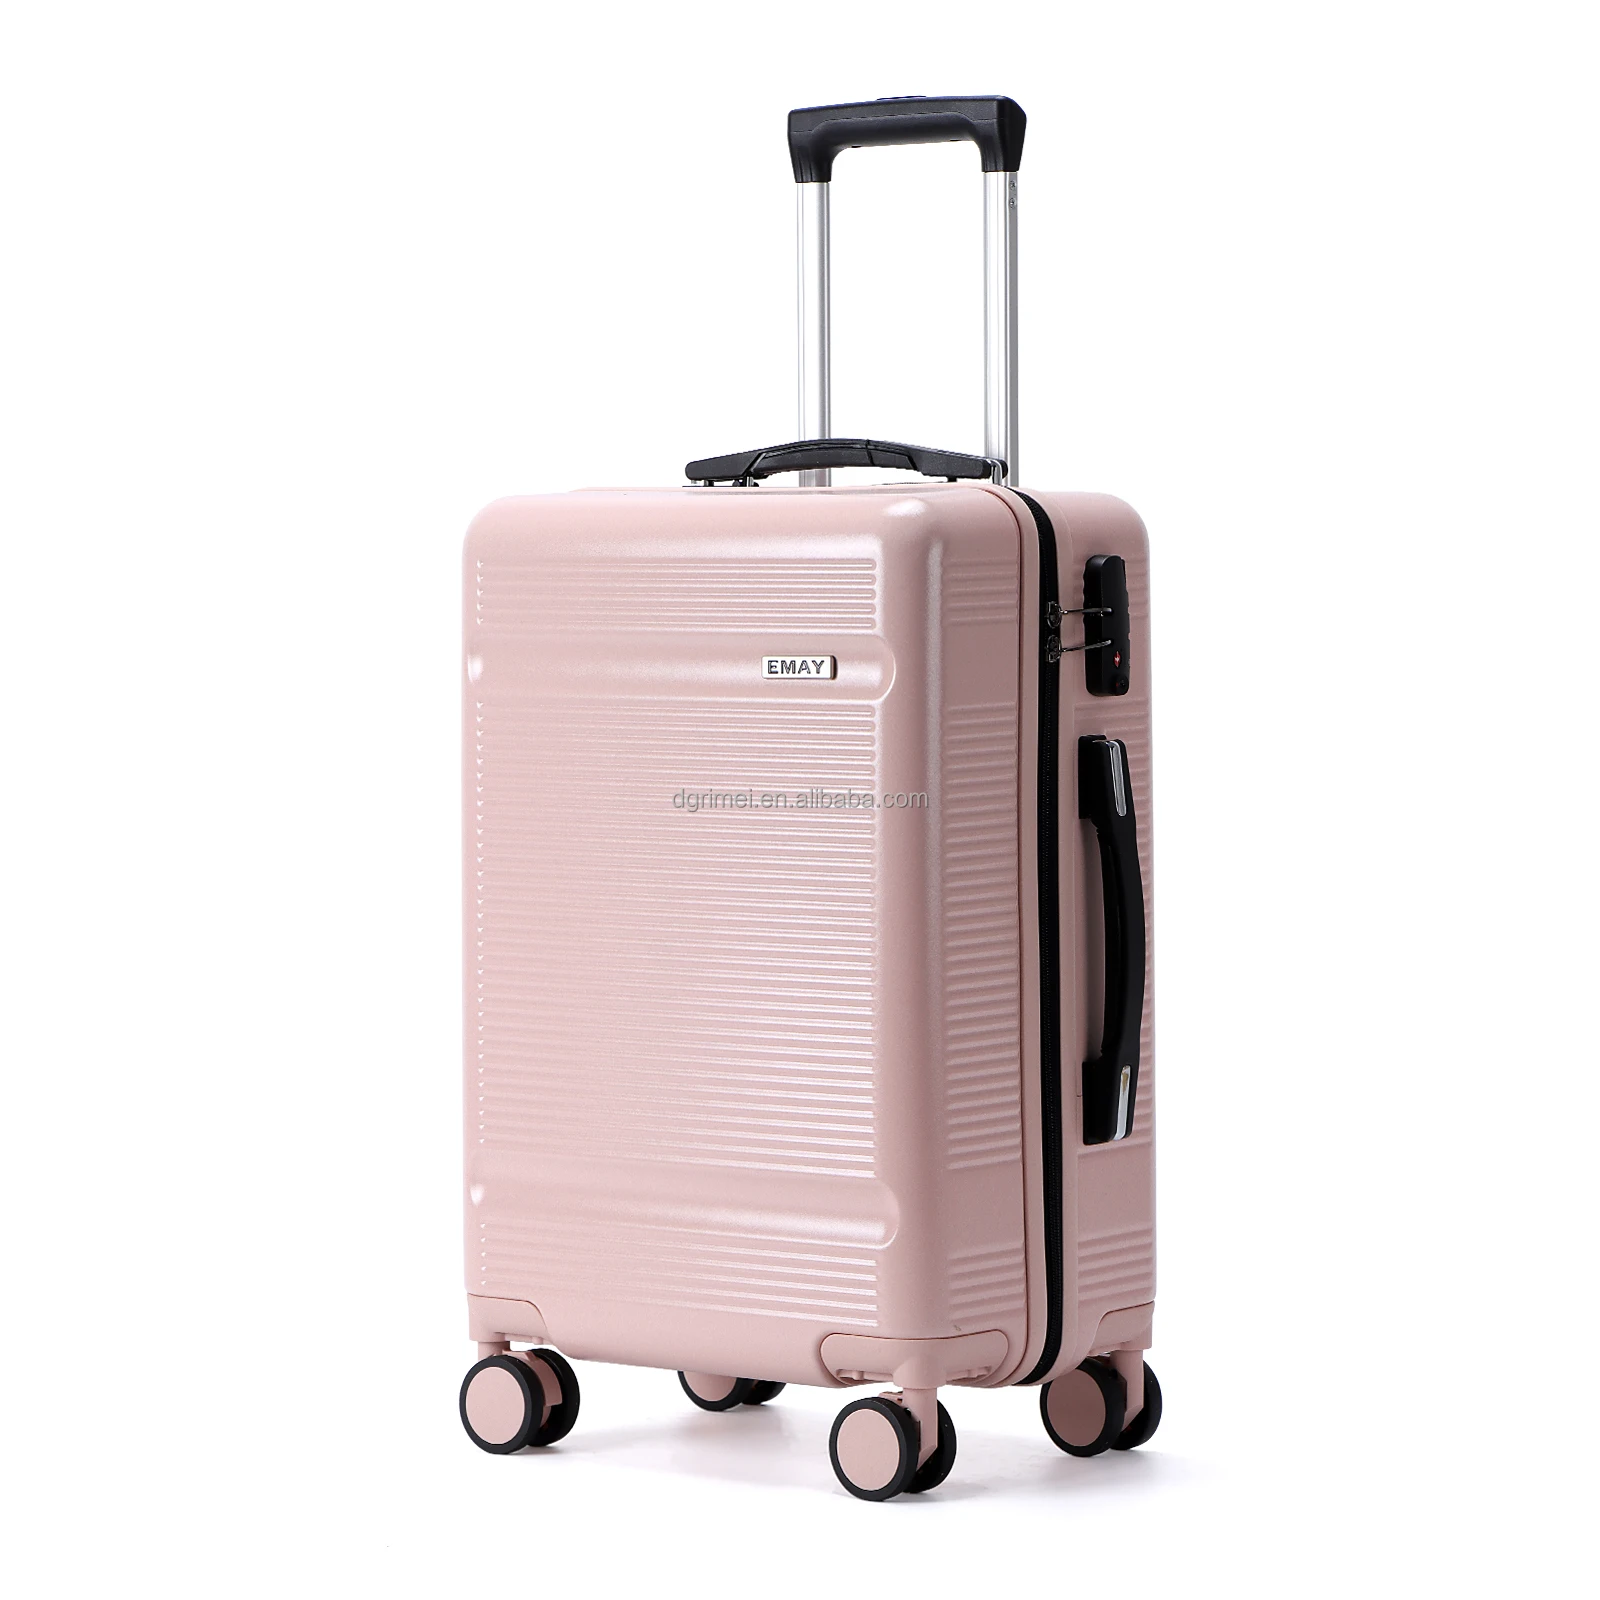 Exclusive New Designer Trolley Abs Pc Luggage Bags For Travel 3pc ...